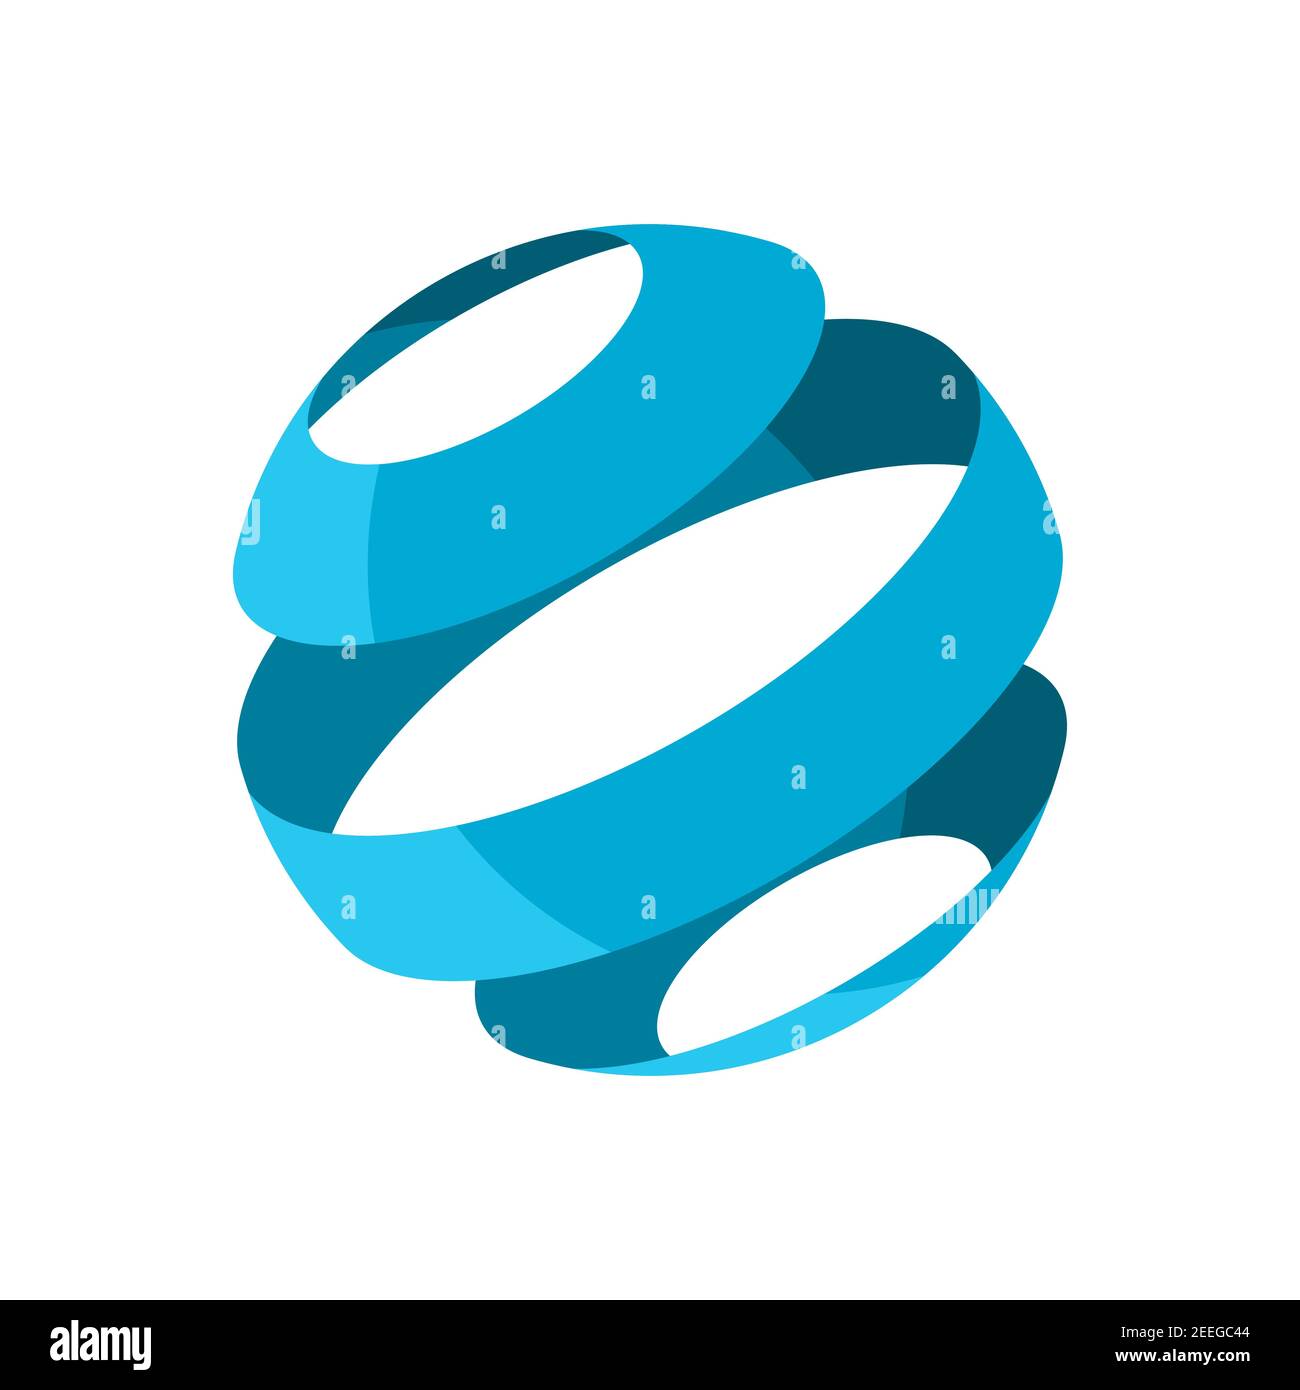 Layered sphere icon. Abstract blue sphere rotation. Circle cut into three parts. 3D spherical design element. Ball divided to 3 slices. Vector Stock Vector